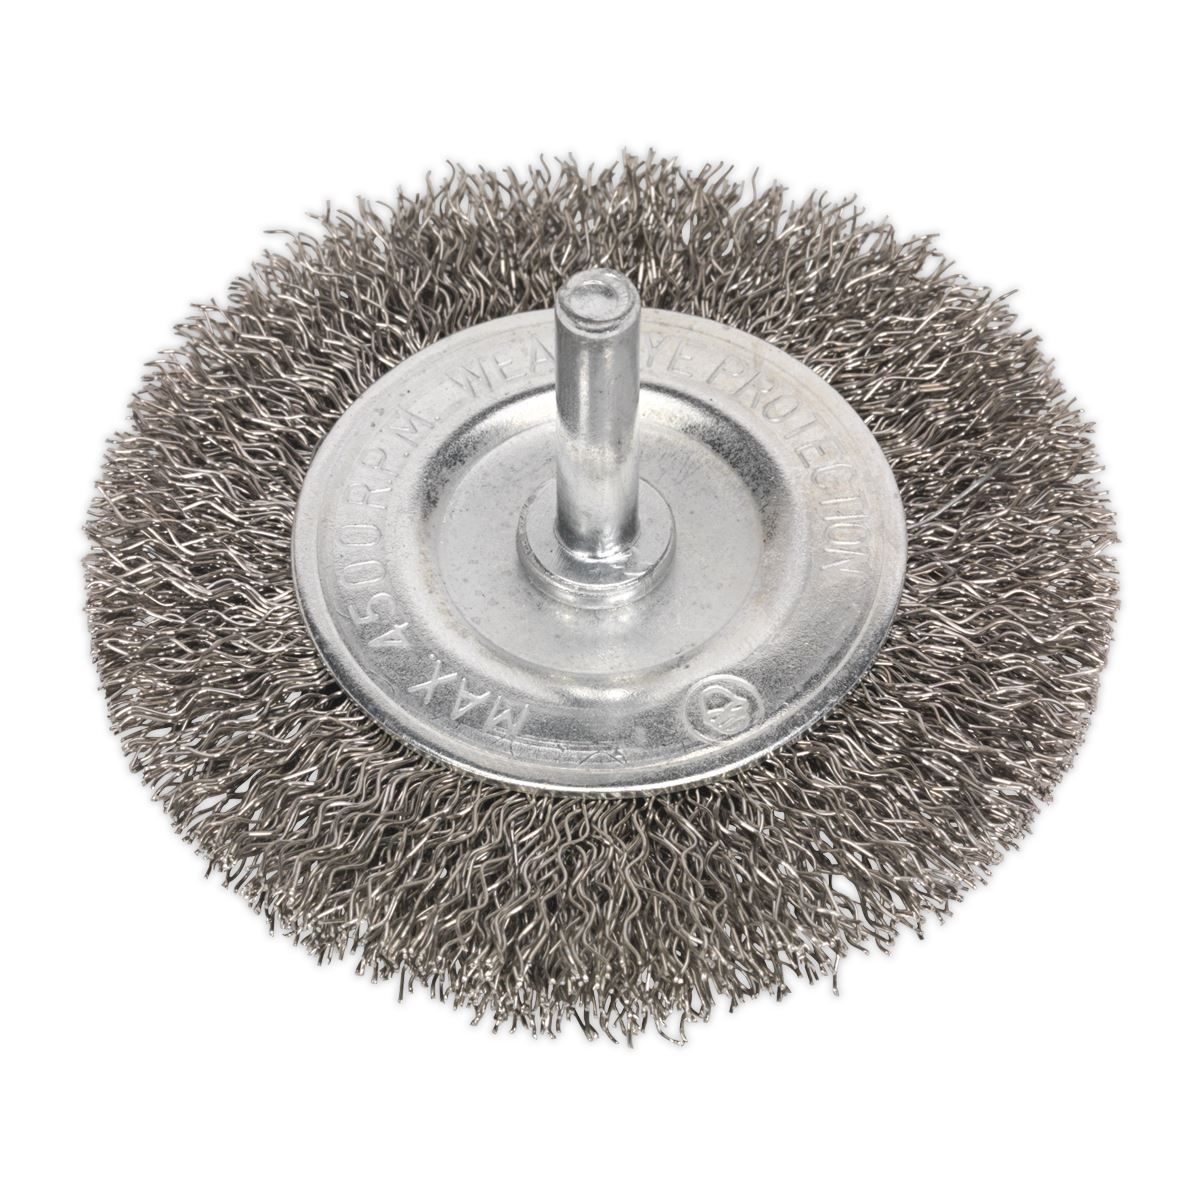 Sealey Crimped Flat Wire Brush Stainless Steel 75mm with 6mm Shaft